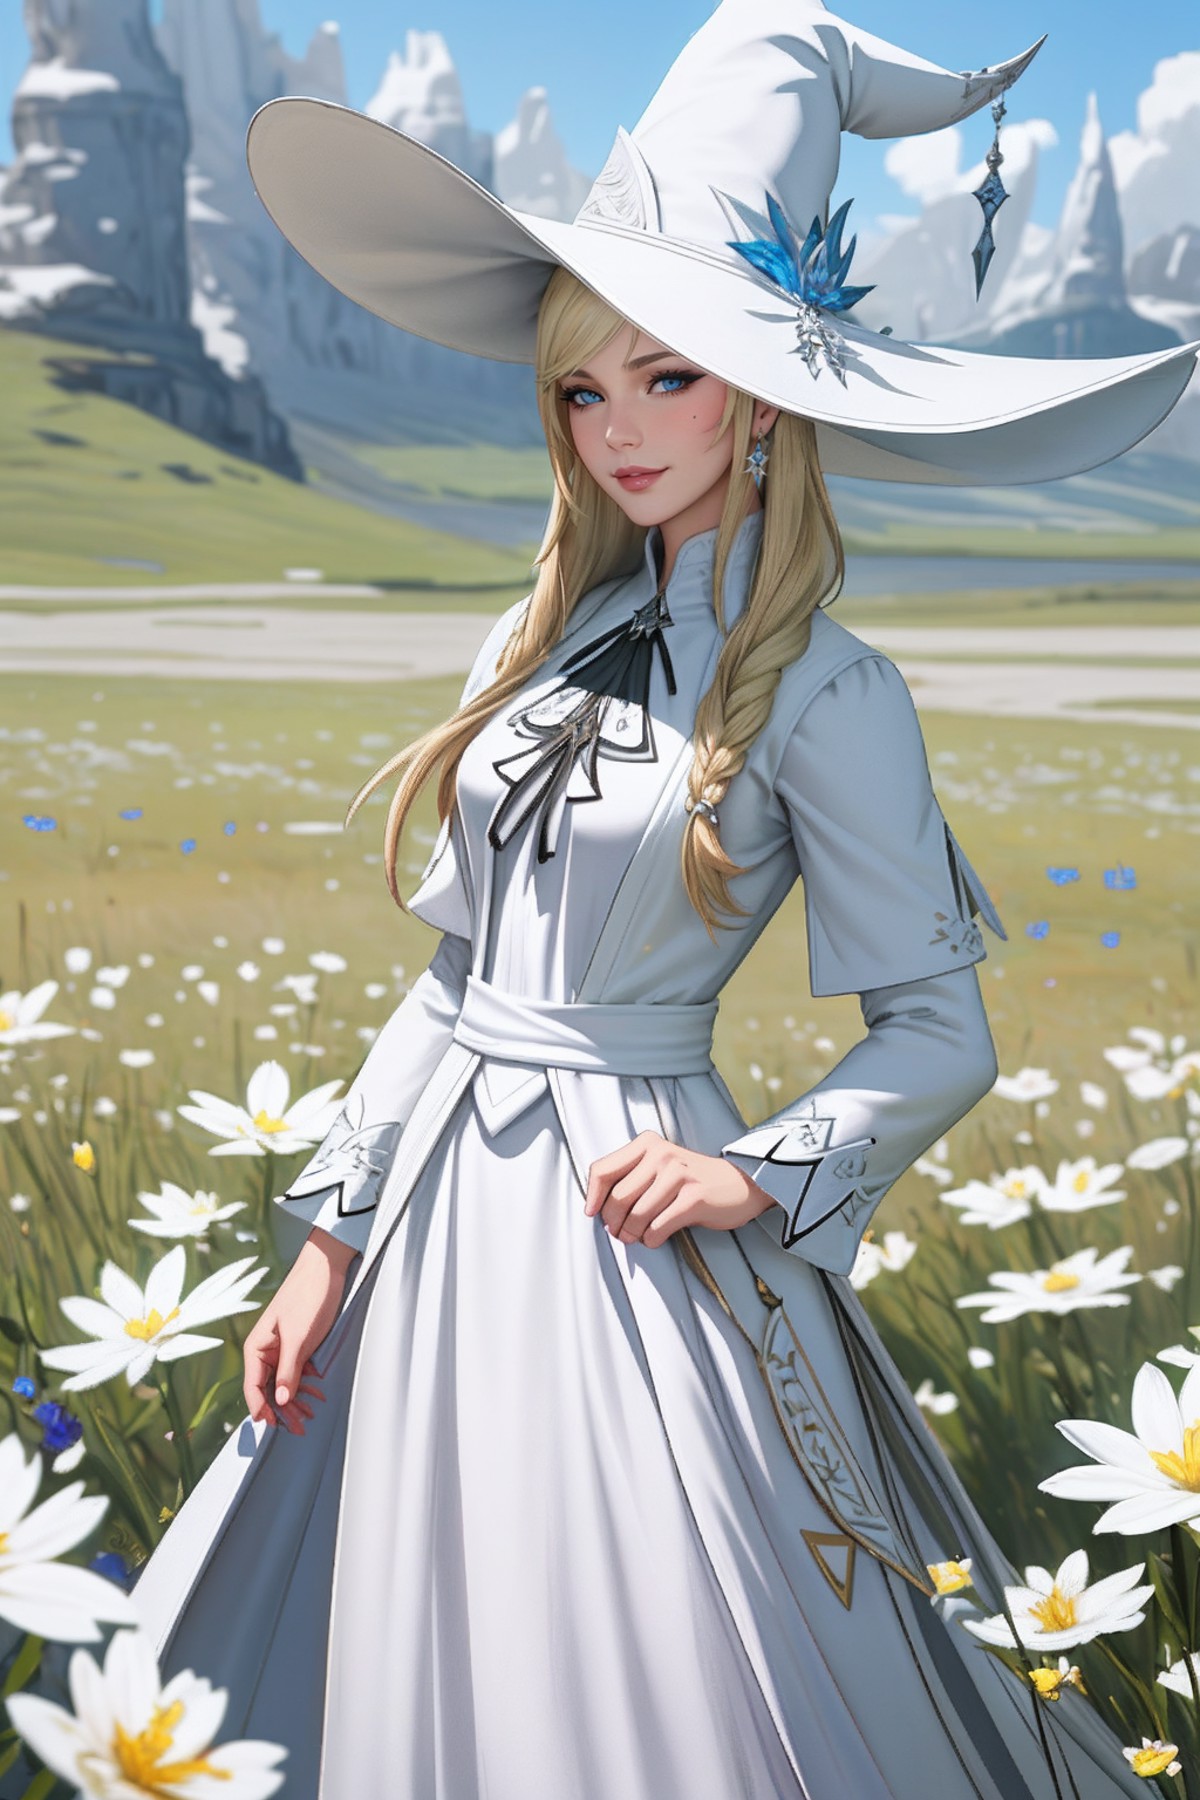 ((Masterpiece, best quality,edgQuality)),smug,smirk,blonde hair,
edgWHM, white mage robe, a woman in a white dress and hat...